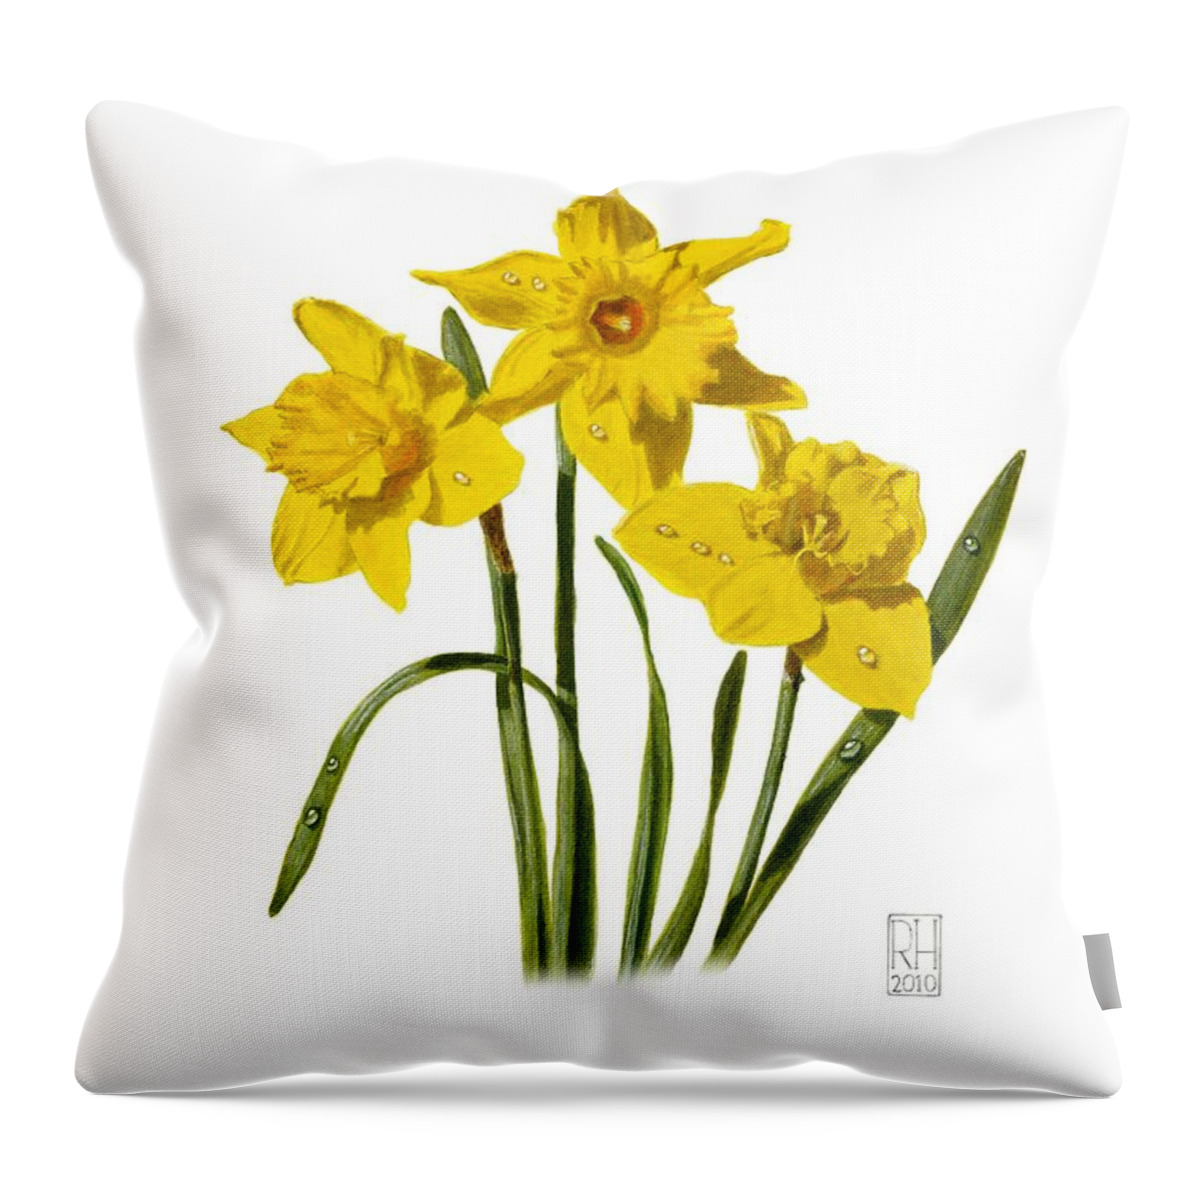 Daffodil Throw Pillow featuring the painting Daffodils by Richard Harpum